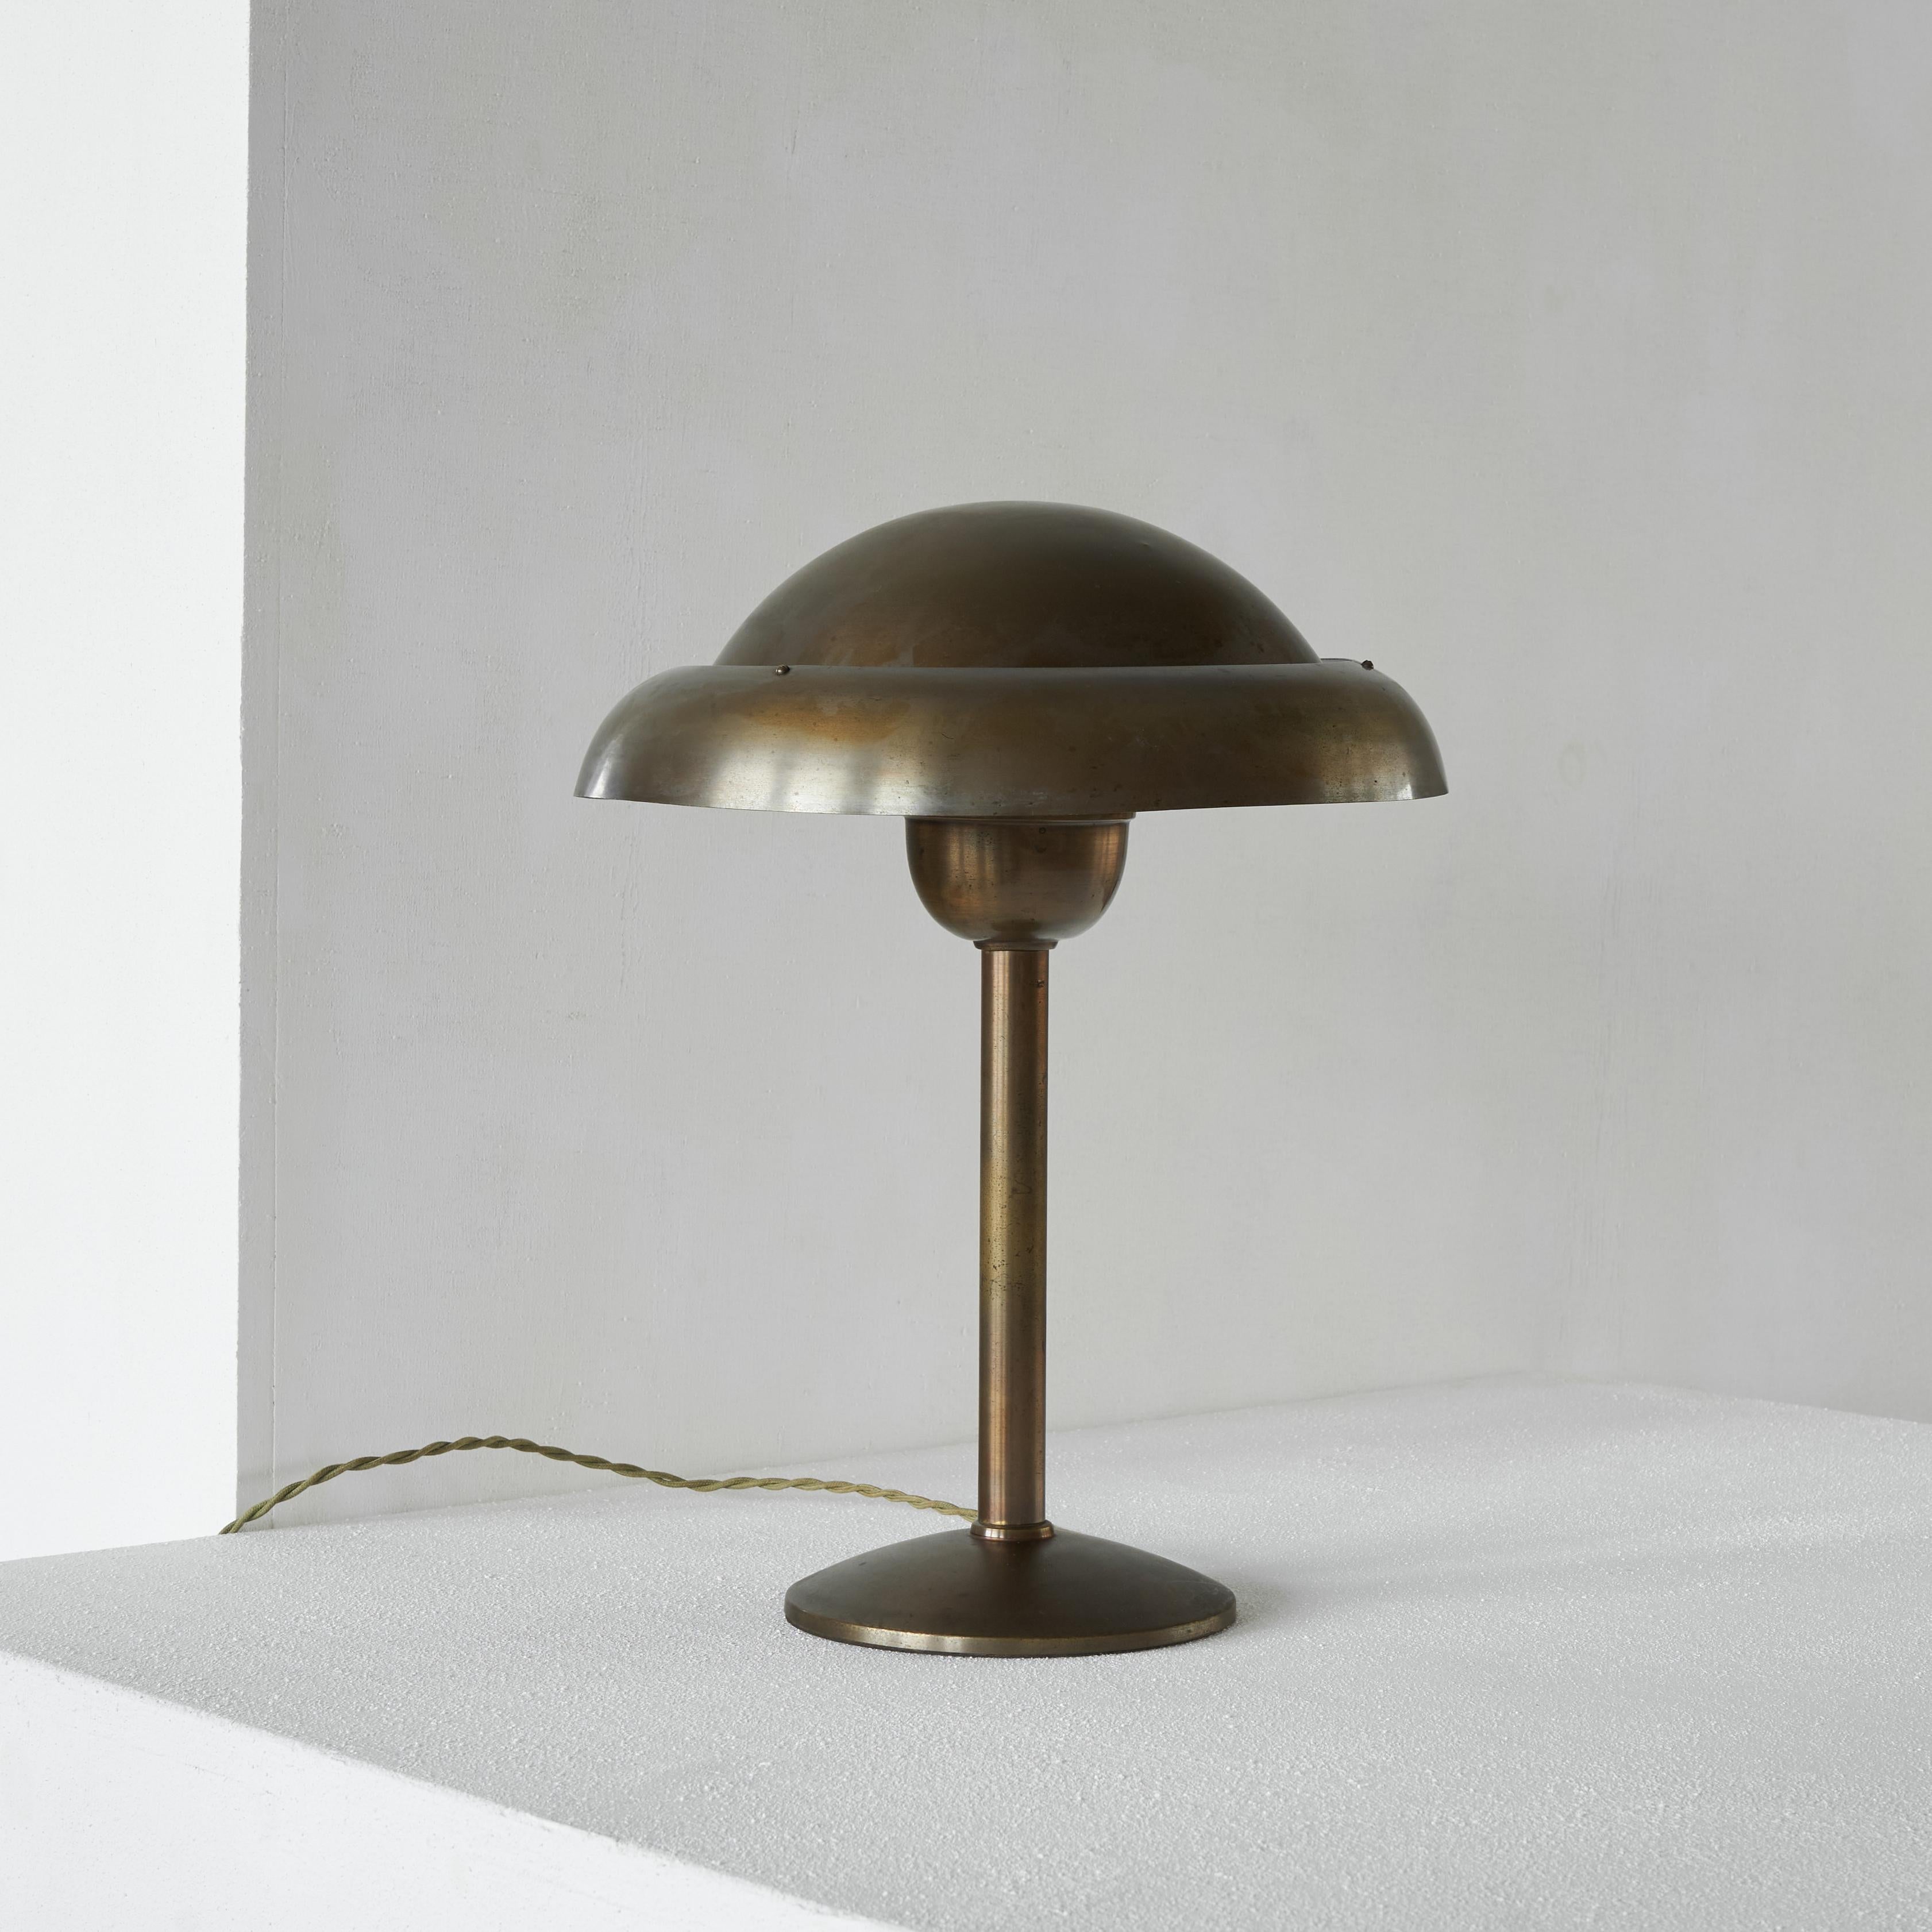 Art Deco table lamp in patinated brass. First half of the 20th century. 

Wonderful and rare table lamp in a distinct art deco style. The shape is simple, but interesting at the same time. Due to the double top shade, the light also comes out at